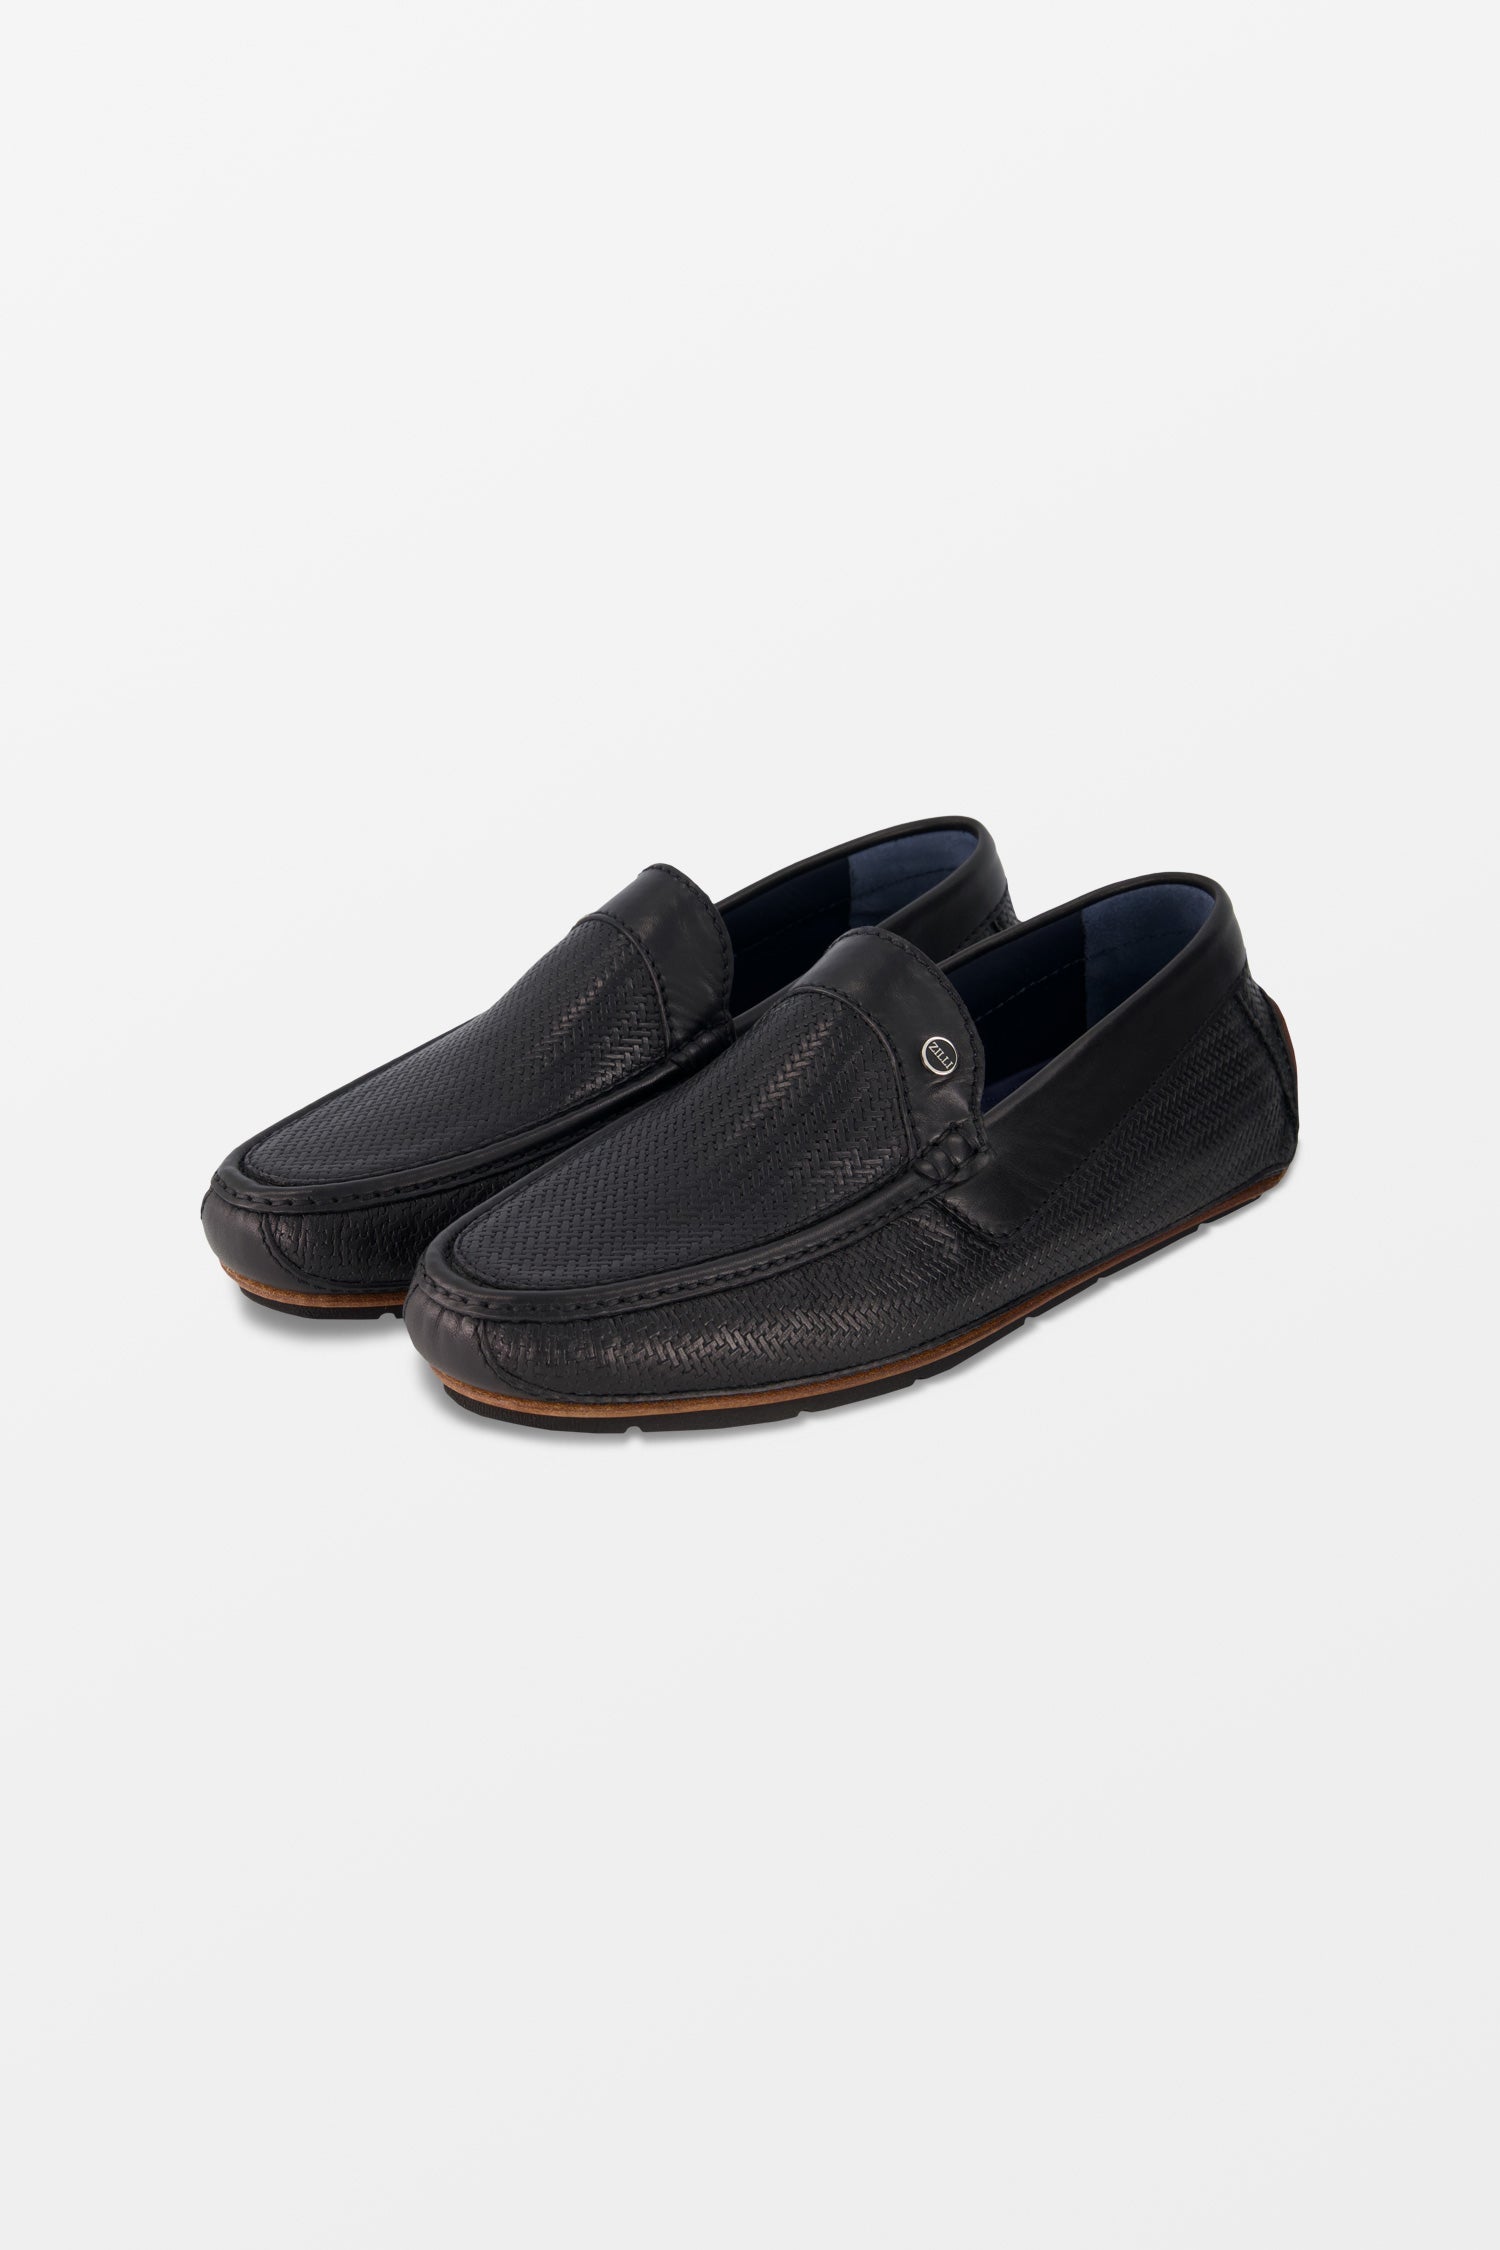 Zilli Casual Driving Moccasins